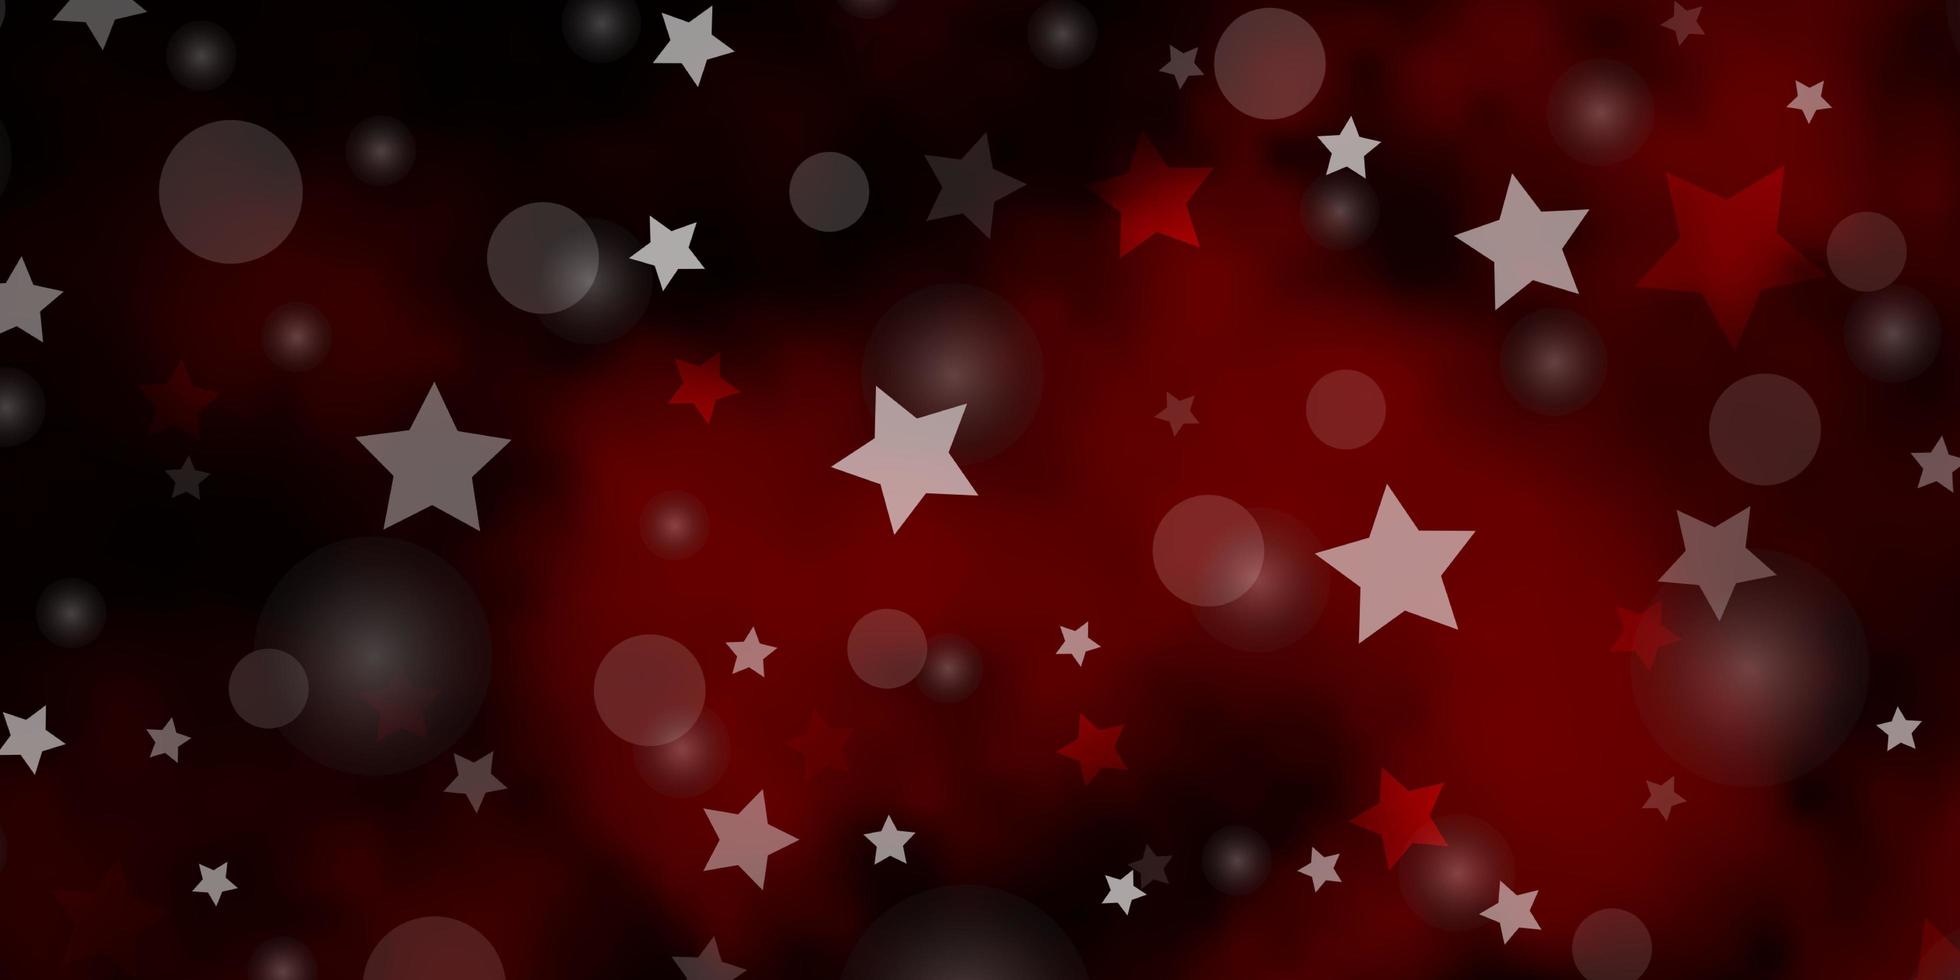 Dark Red vector texture with circles, stars.